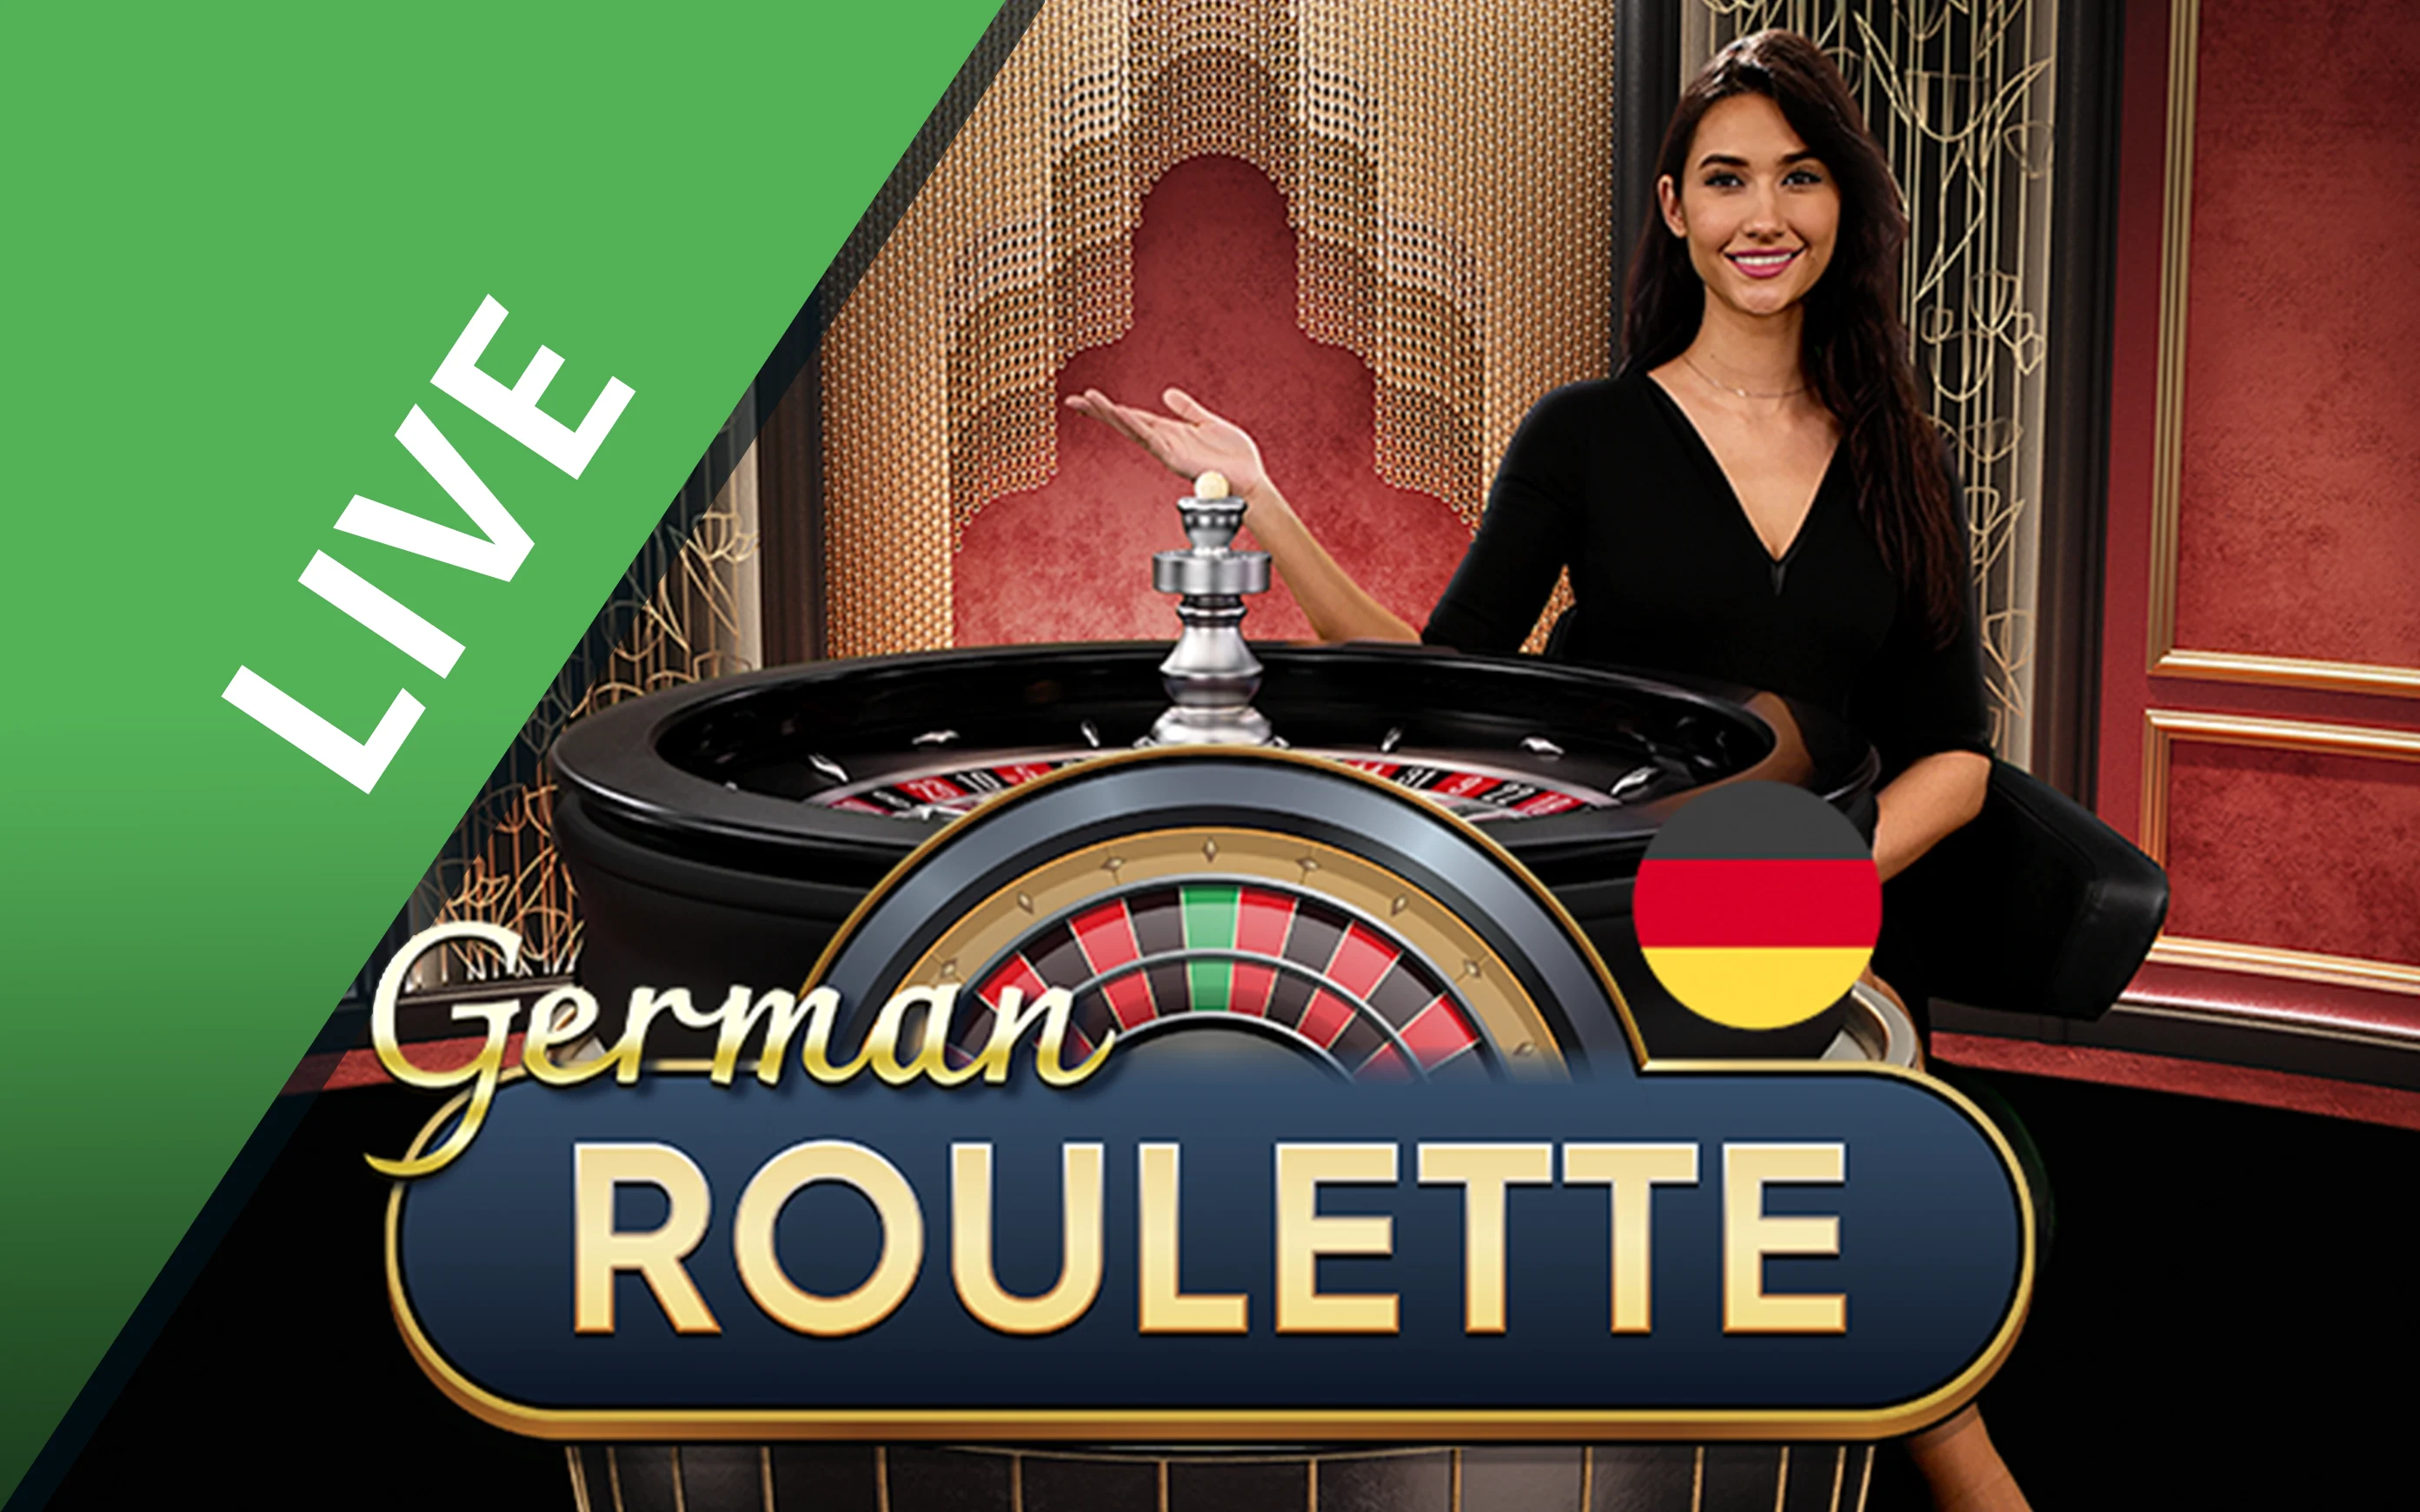 Play German Roulette on Starcasino.be online casino